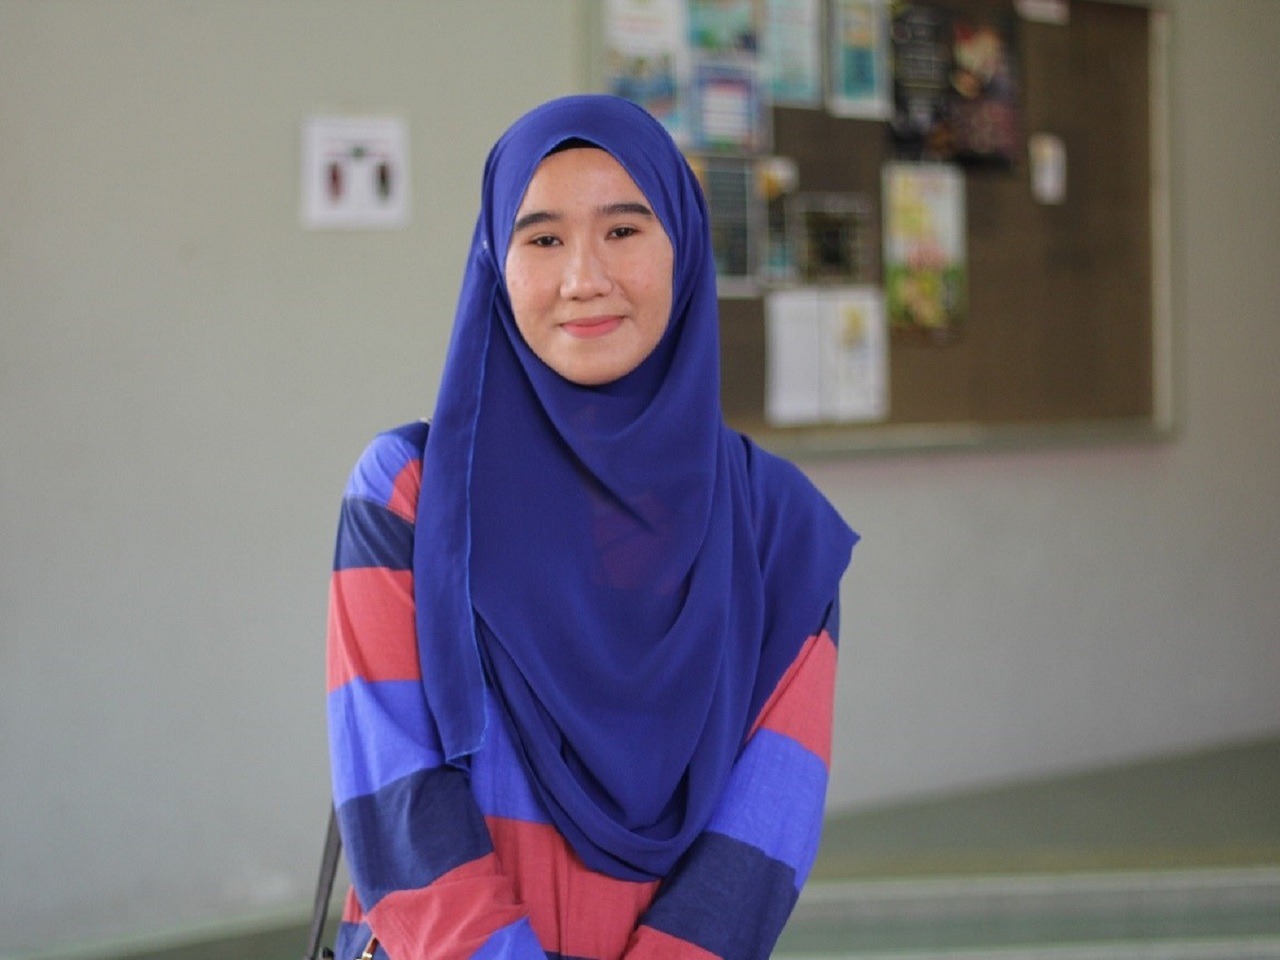 “What made me chose Curtin Malaysia? I was really interested in marketing and business. My sister runs a successful business and that made me want to start my own business like a dessert shop or café. All these motivated me to choose a course in...